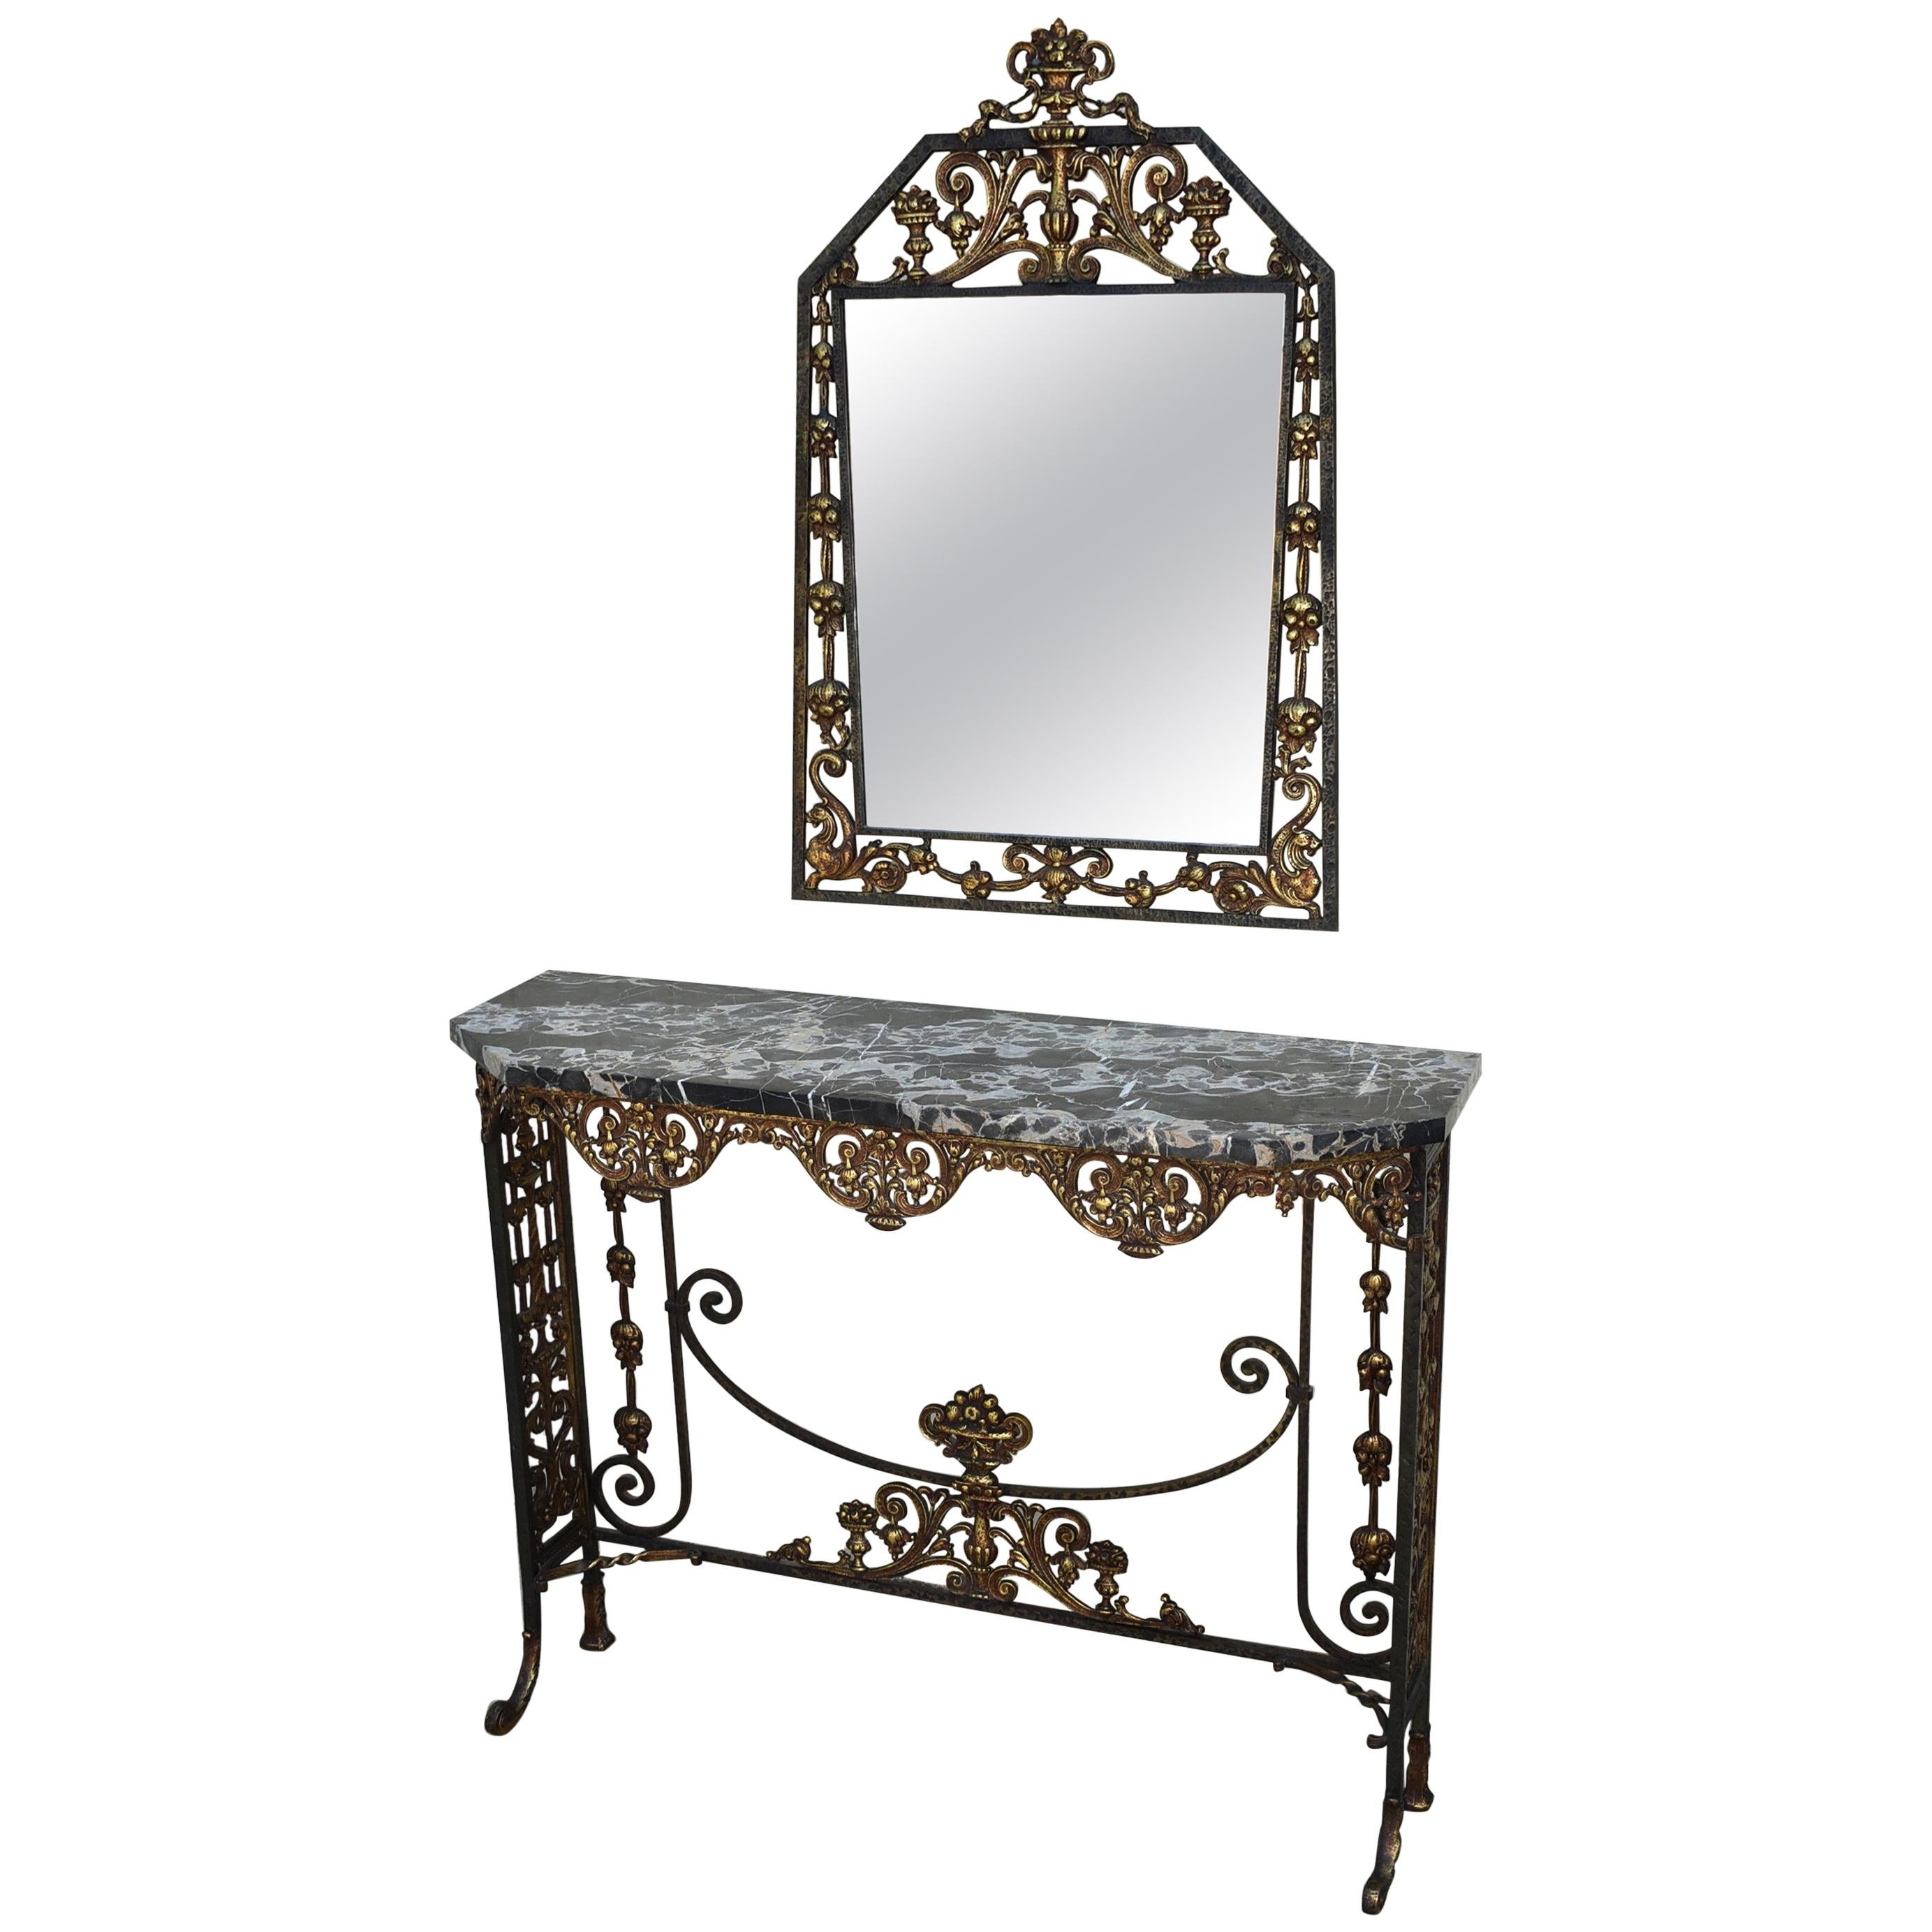 Iron and Bronze Hammered Console Entry Marble-Top Table with Mirror